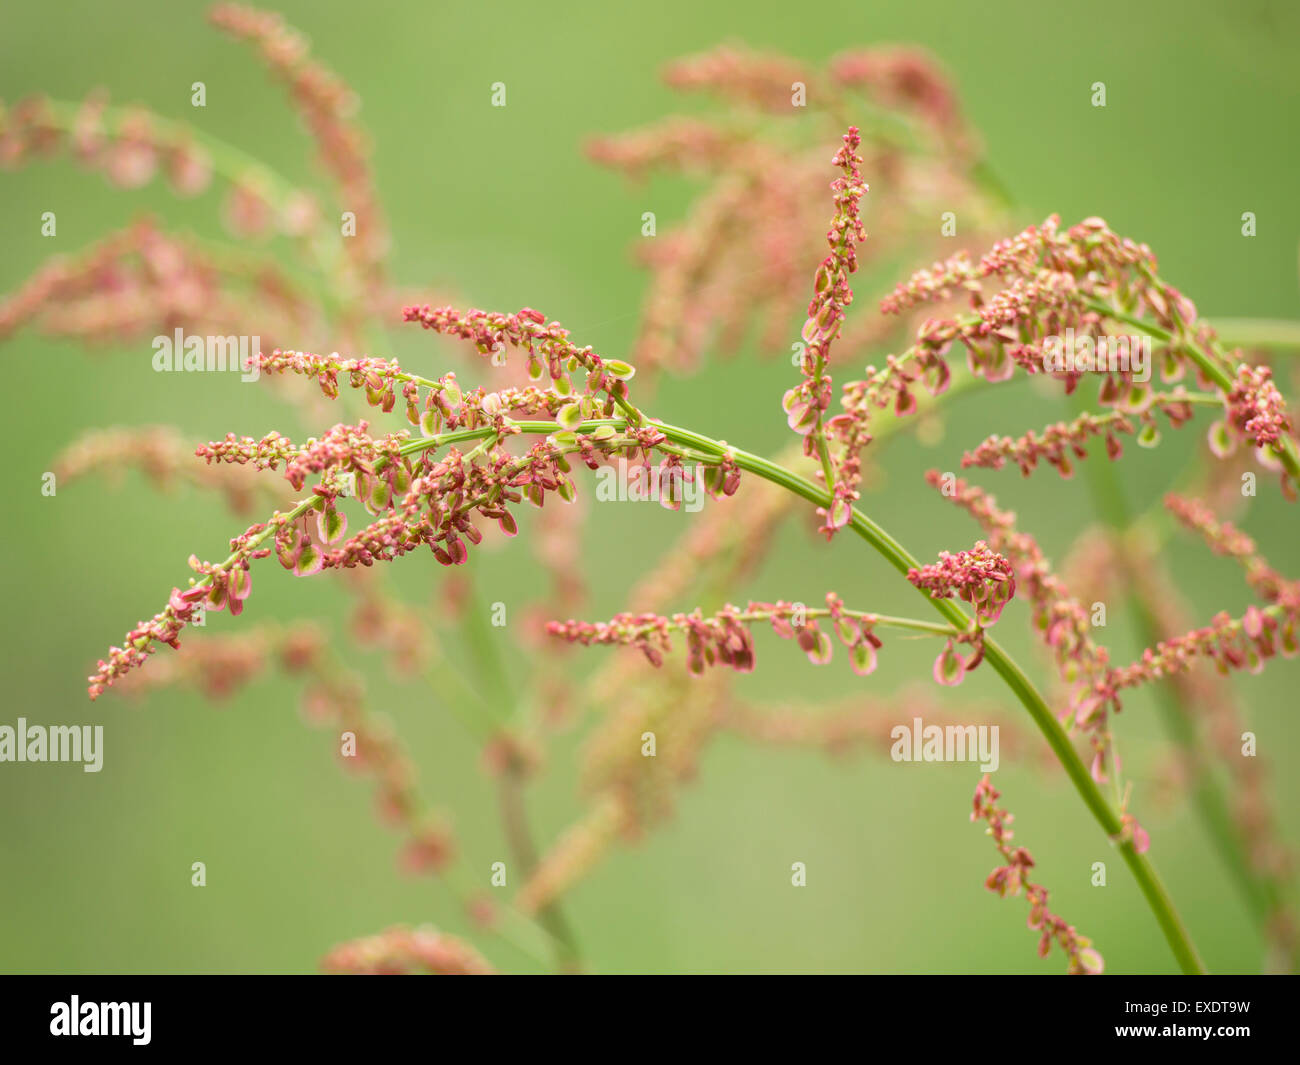 Common sorrel, close up of the red and green flowers Stock Photo